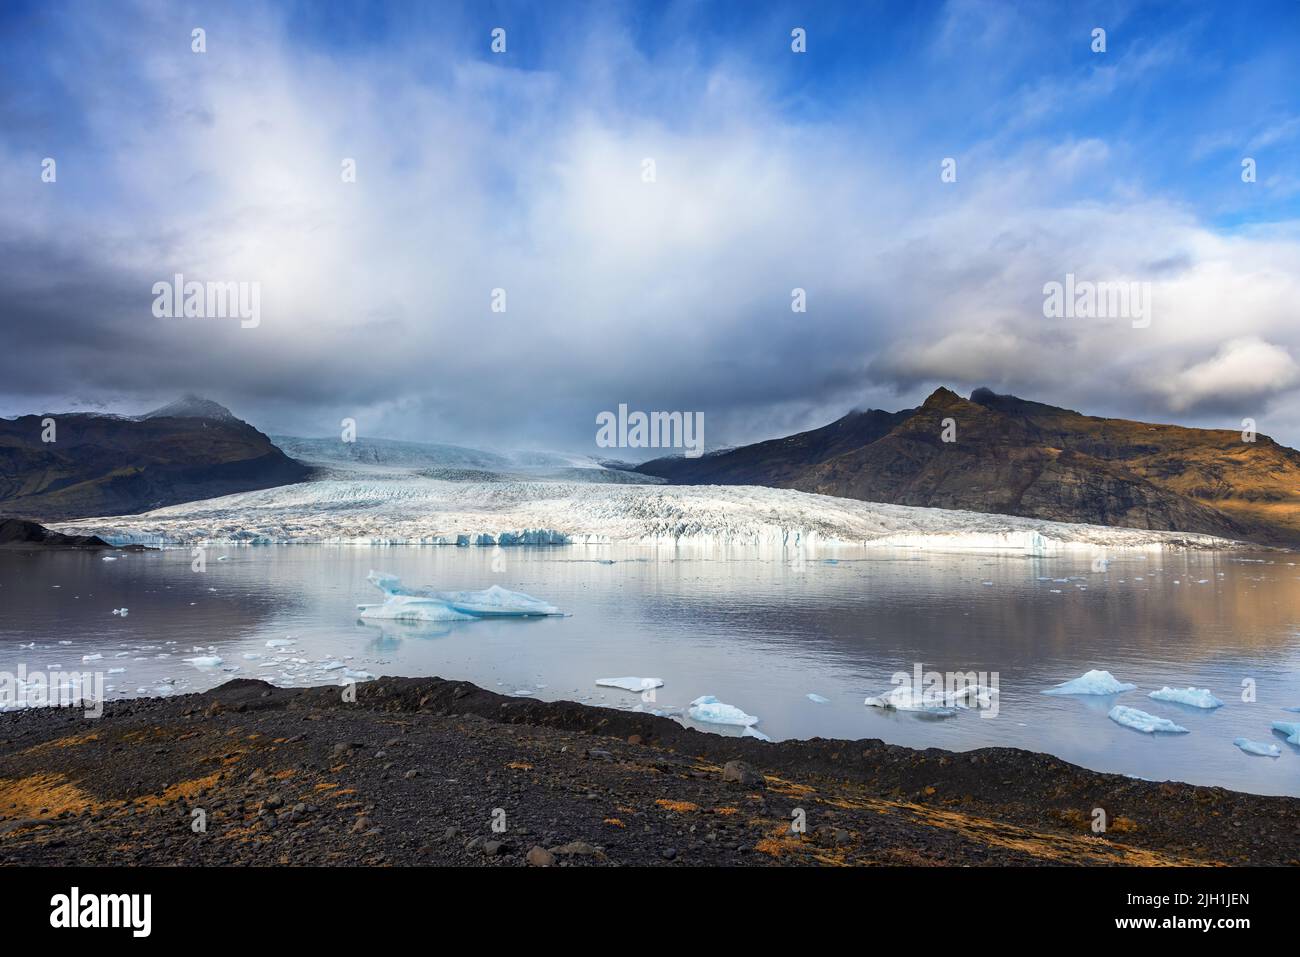 Autumn colours at Fjallsarlon glacier lagoon, Southern Iceland. Part of the Vatnajokull Glacier, the largest ice cap in iceland. Stock Photo